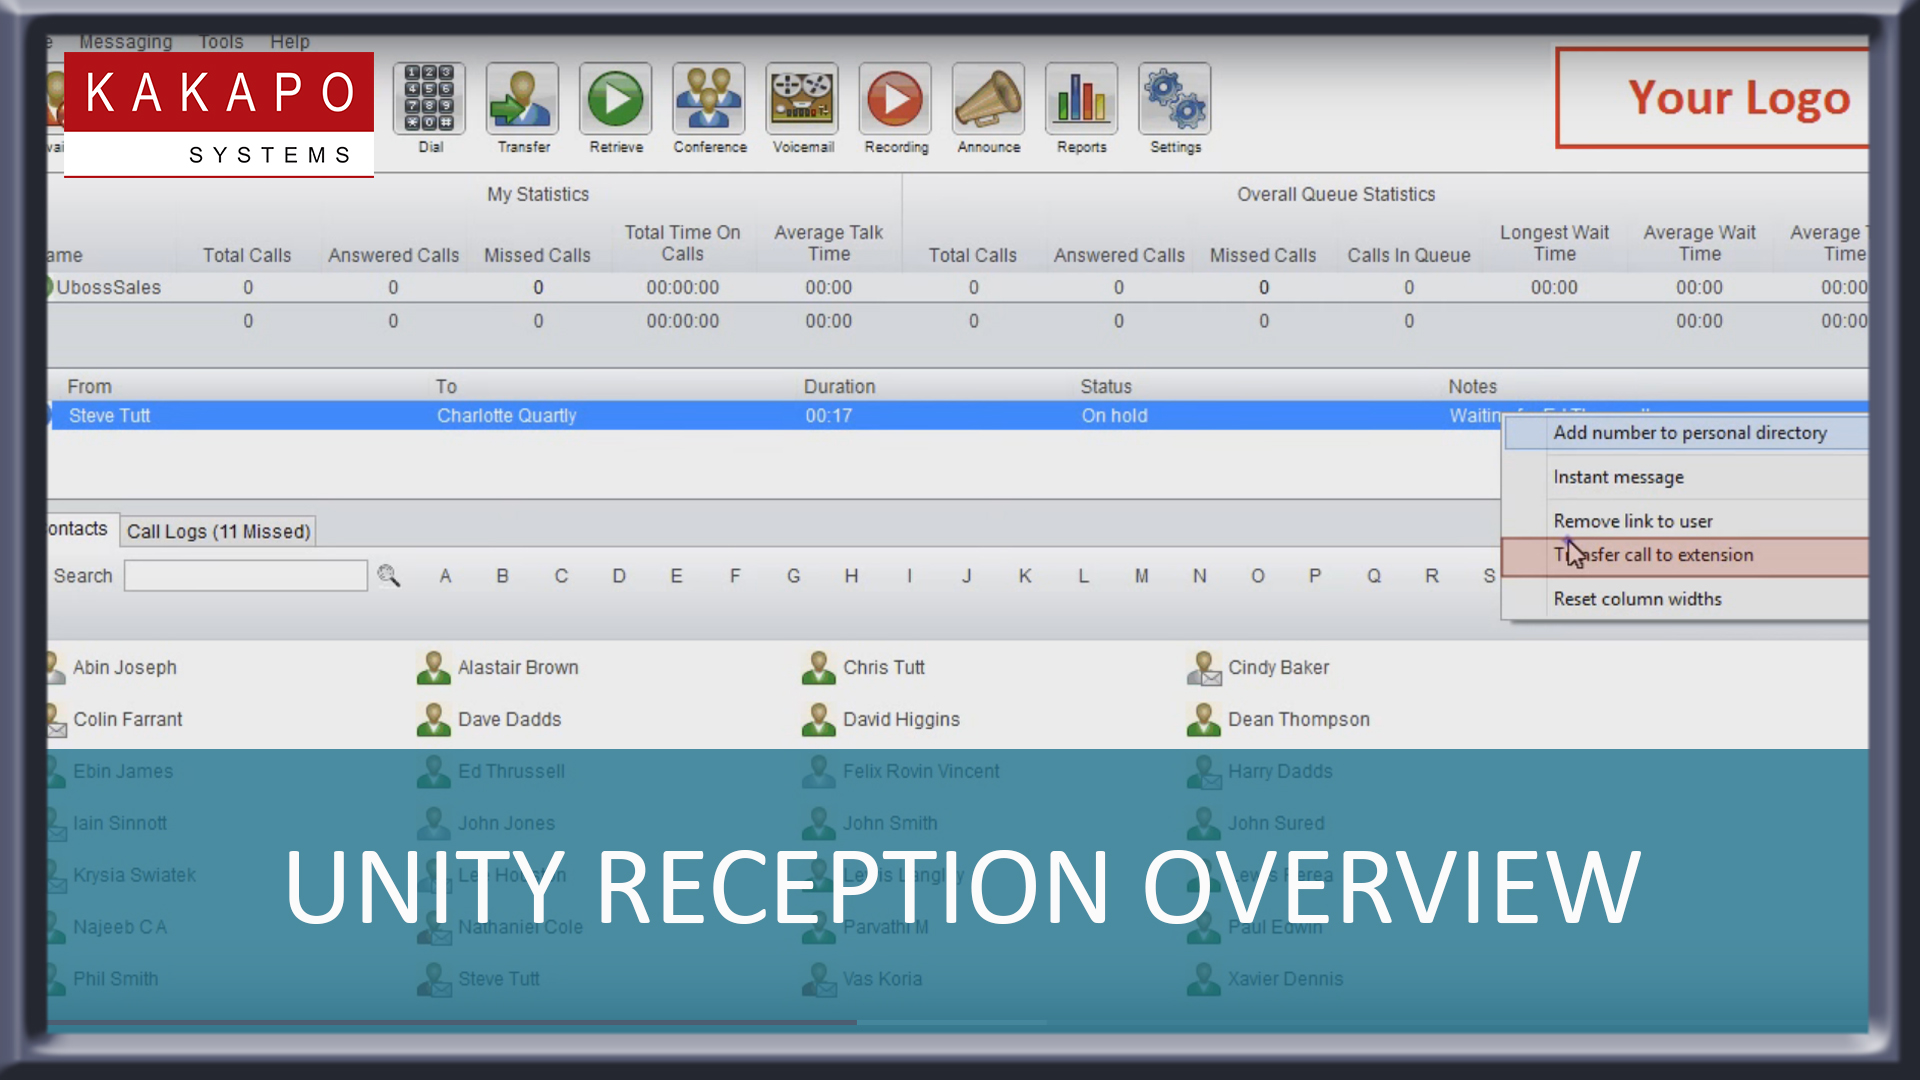 Unity Reception Overview